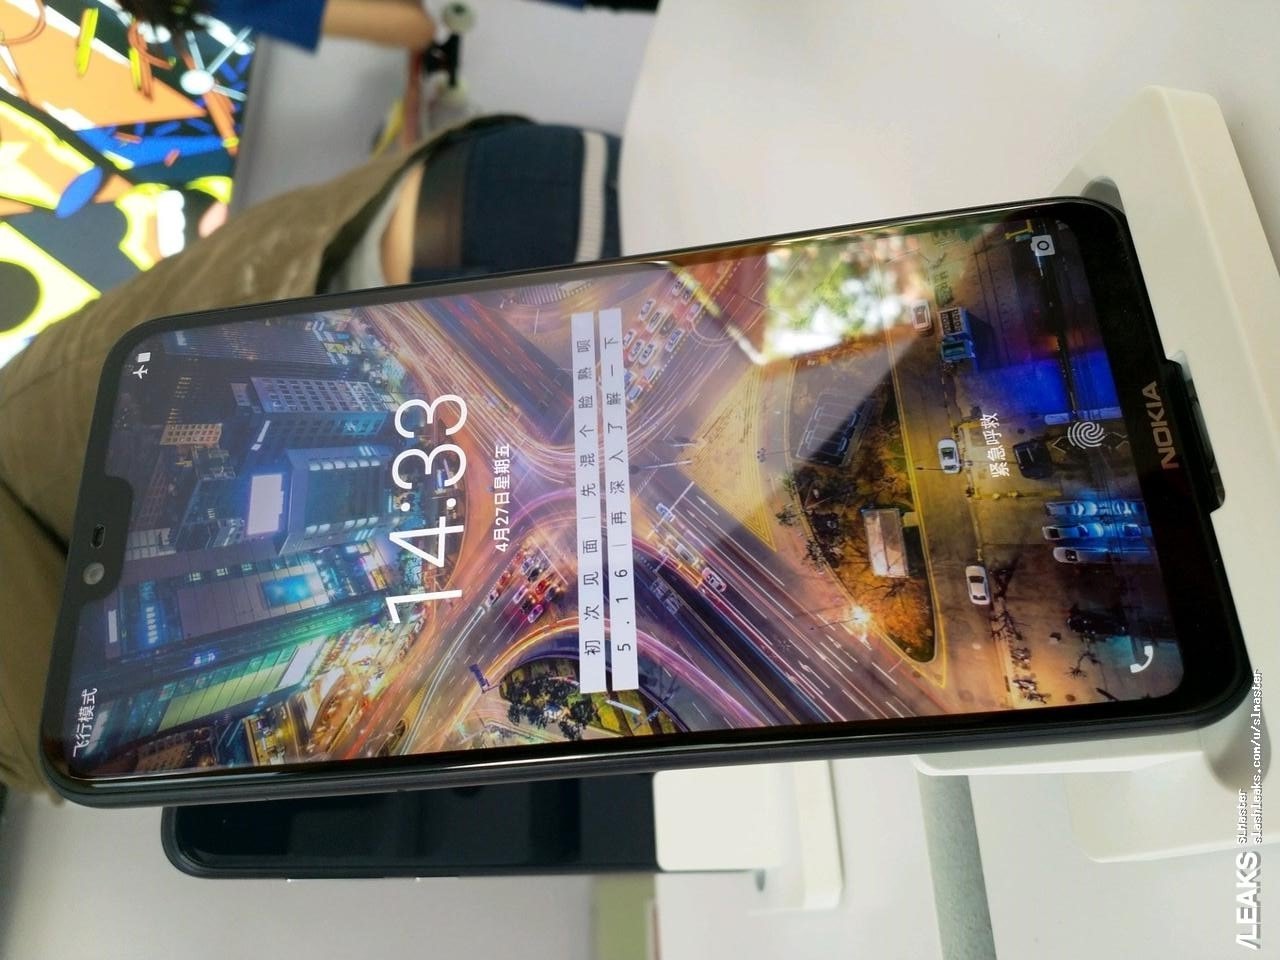 Nokia X (2018) Hands-On image leaked featured